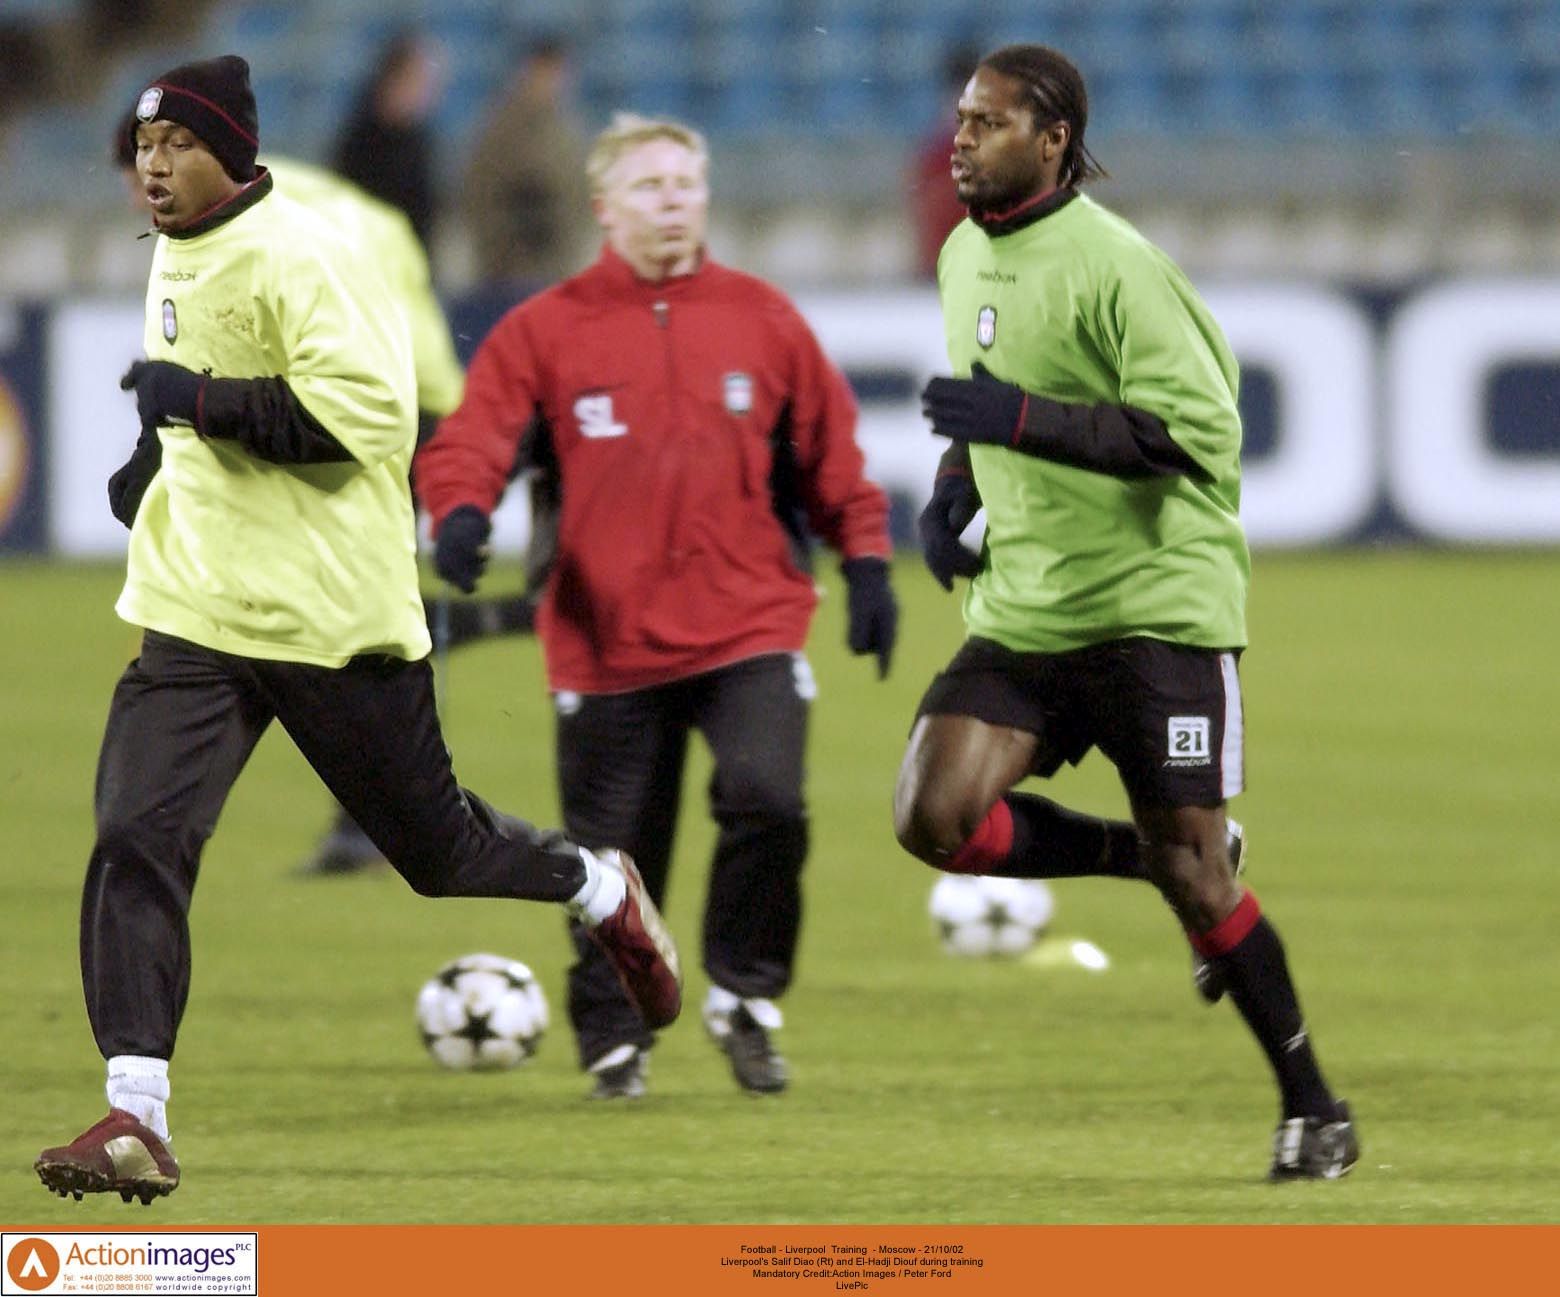 Football - Liverpool  Training  - Moscow - 21/10/02 
Liverpool's Salif Diao (Rt) and El Hadji Diouf during training 
Mandatory Credit:Action Images / Peter Ford 
LivePic